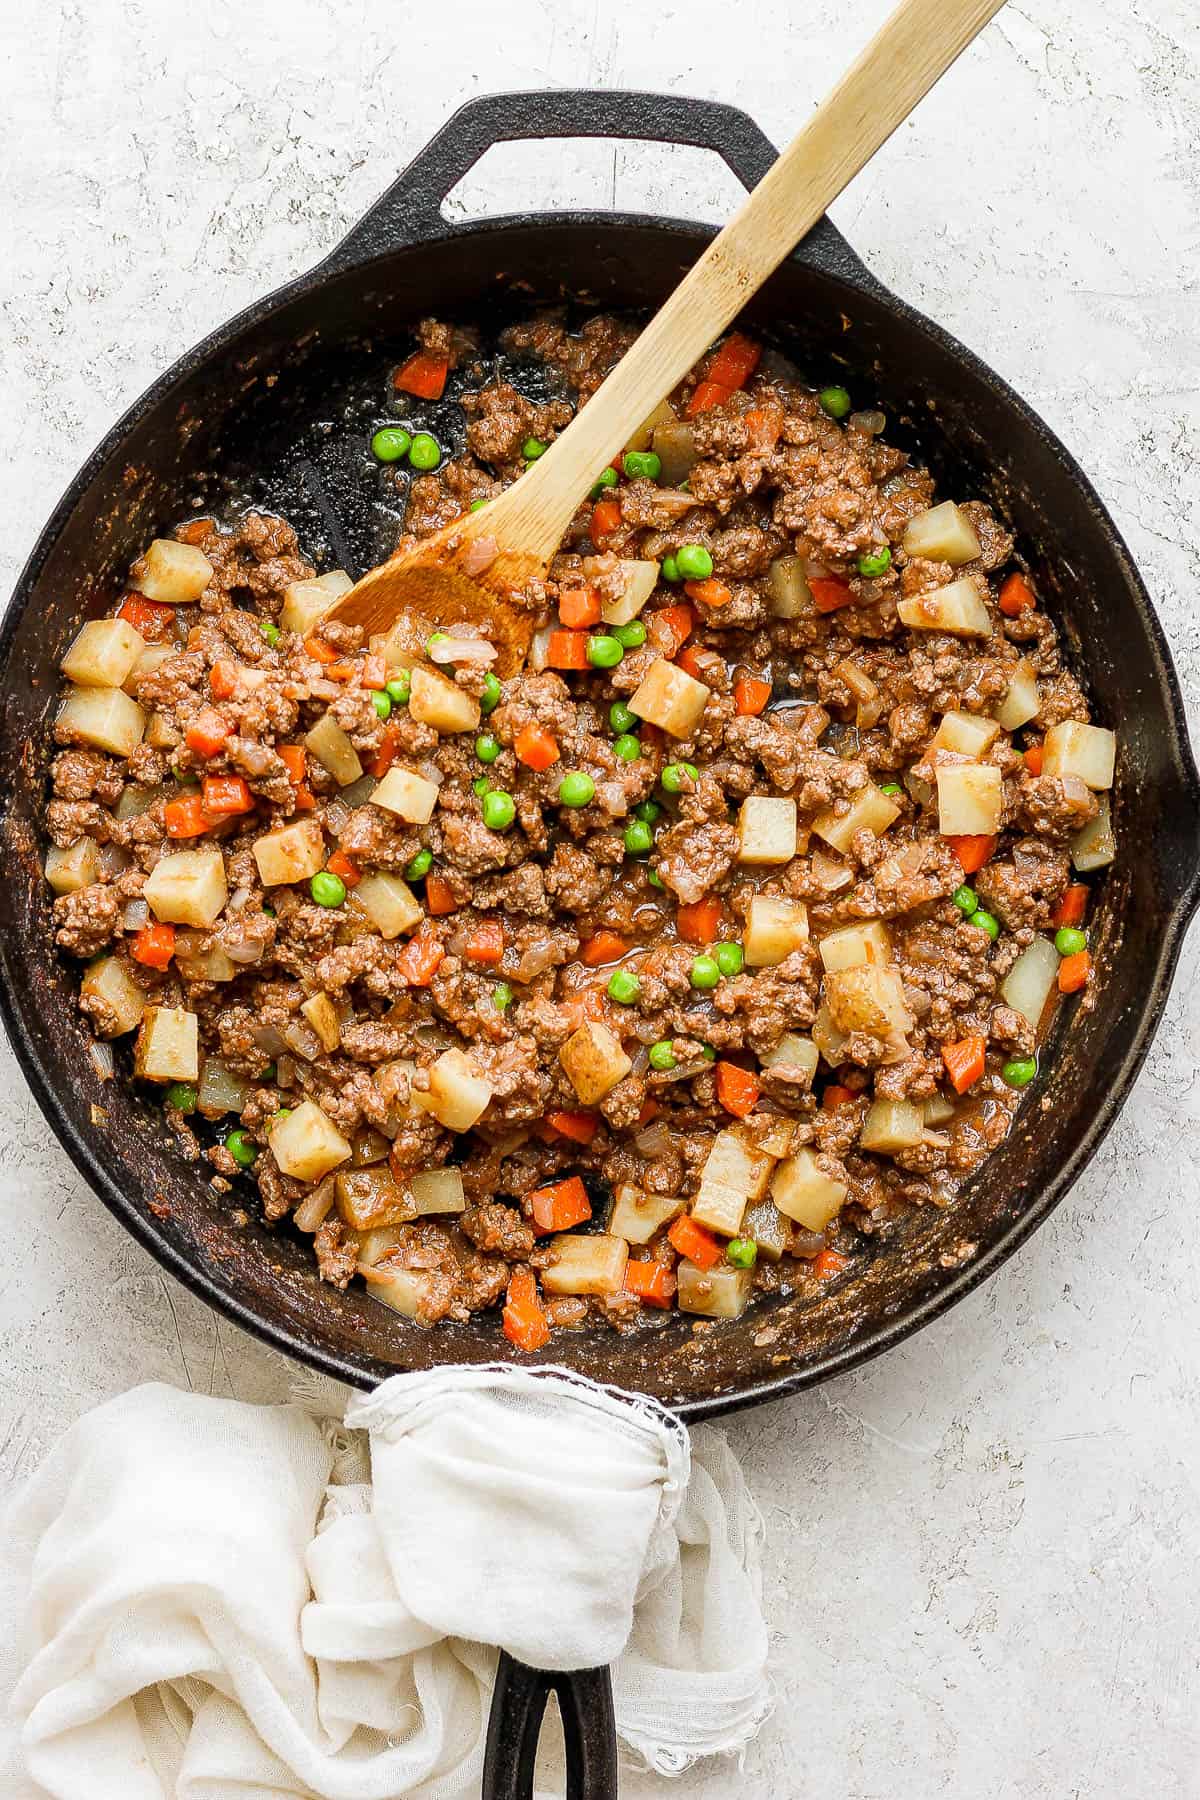 Picadillo in a cast iron skillet ready to be served.